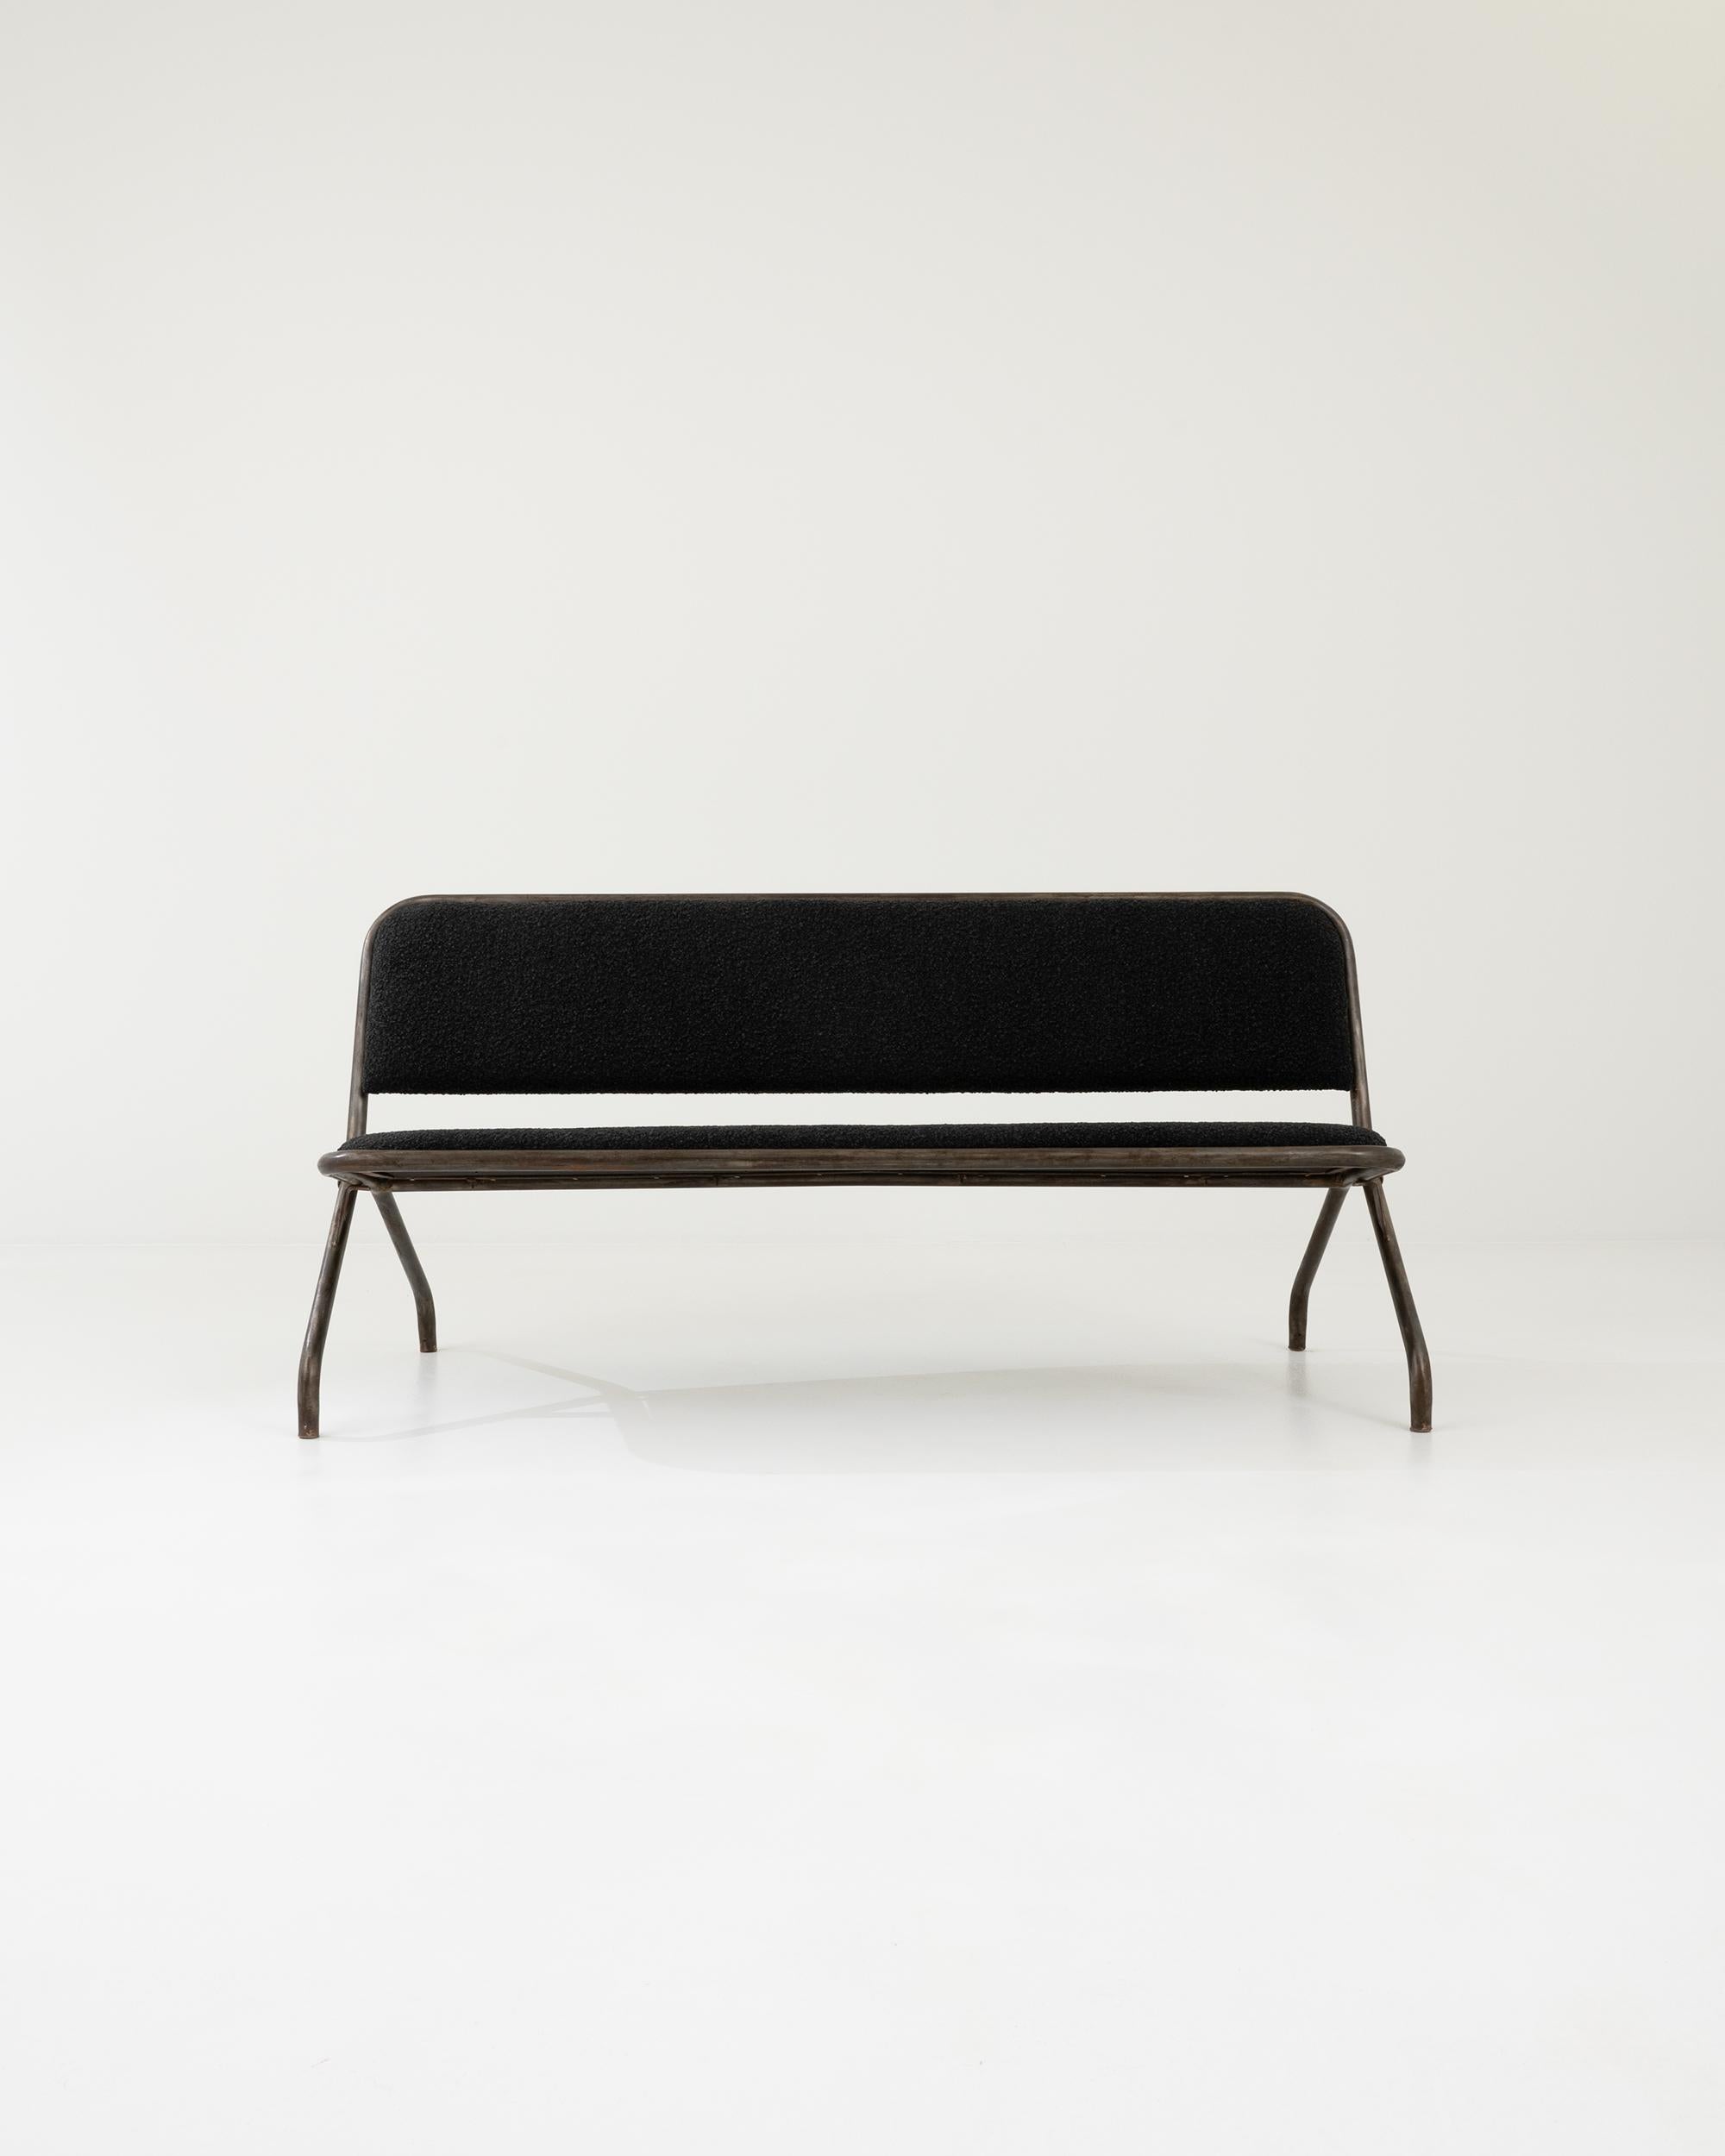 A metal upholstered bench created in 20th century France. Industrial yet approachable, this straightforward folding bench exudes a surprising coziness. With a minimal design, this bench allows its industrial material to shine, with a time-earned